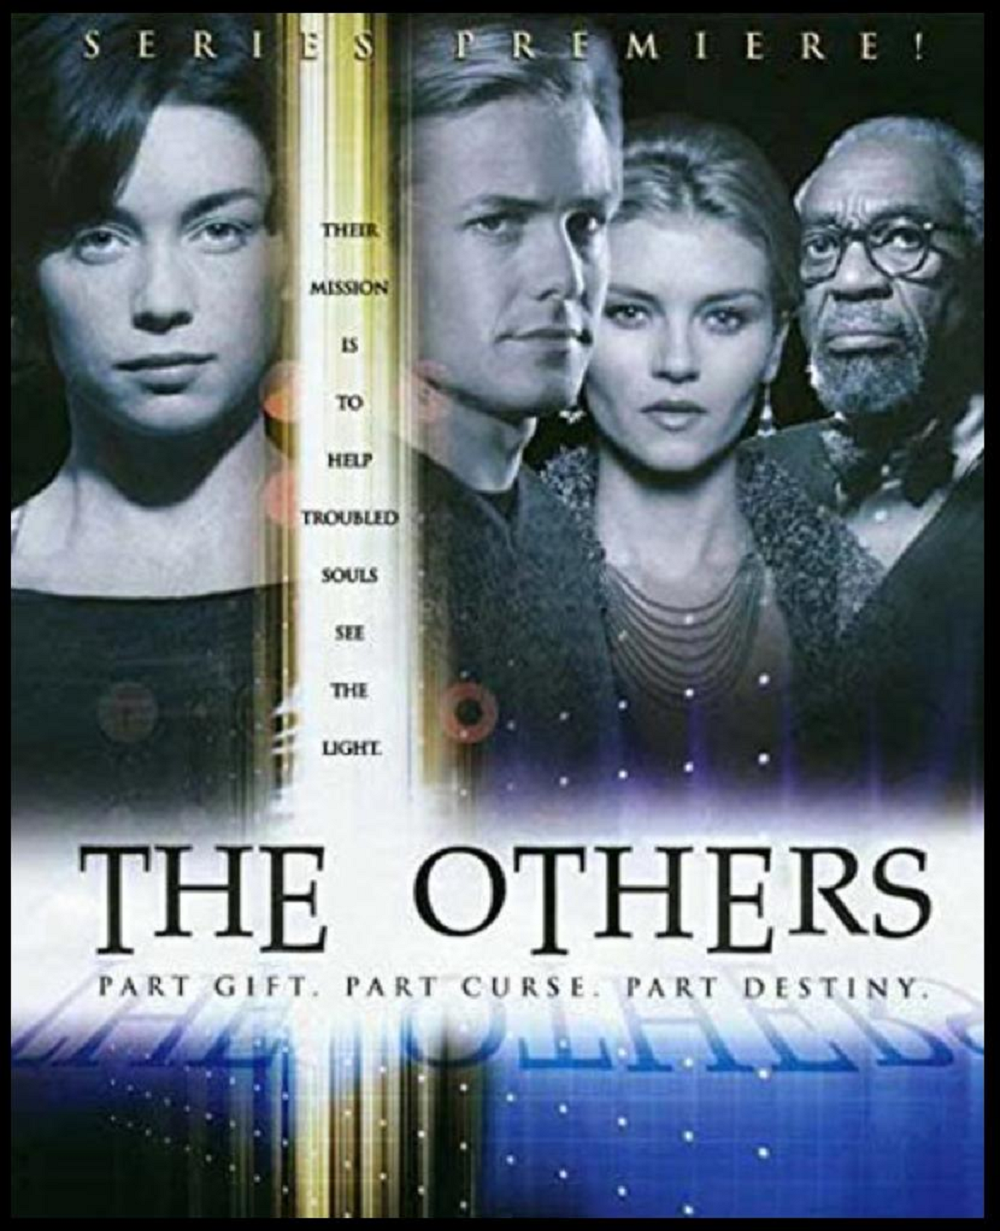 The Others, 1999-2000